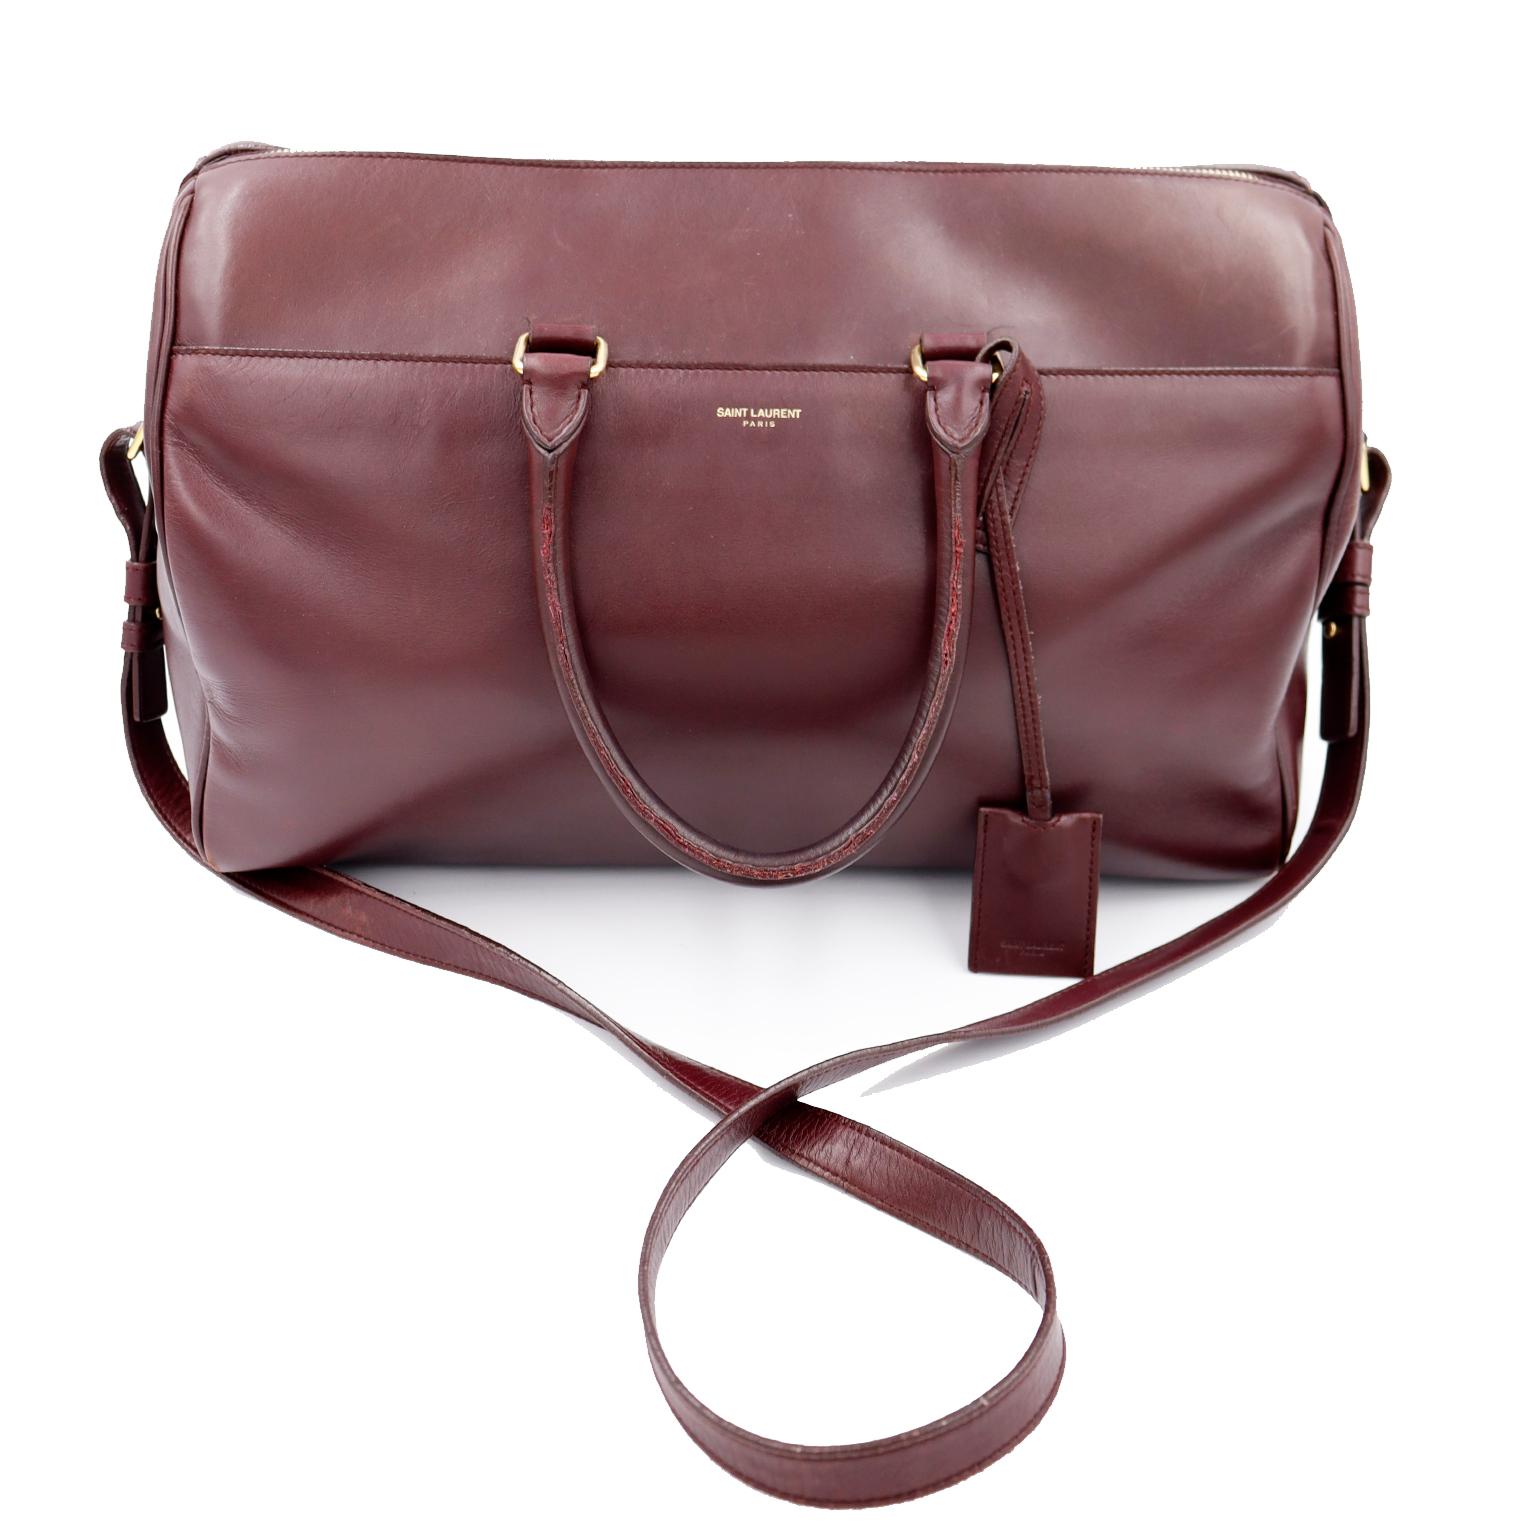 This deep burgundy leather Saint Laurent large duffle bag has double handles, a top zipper and a removable shoulder strap. The bag has brass hardware, including brass feet and a brass branded zipper pull. There is an outside open pocket and an